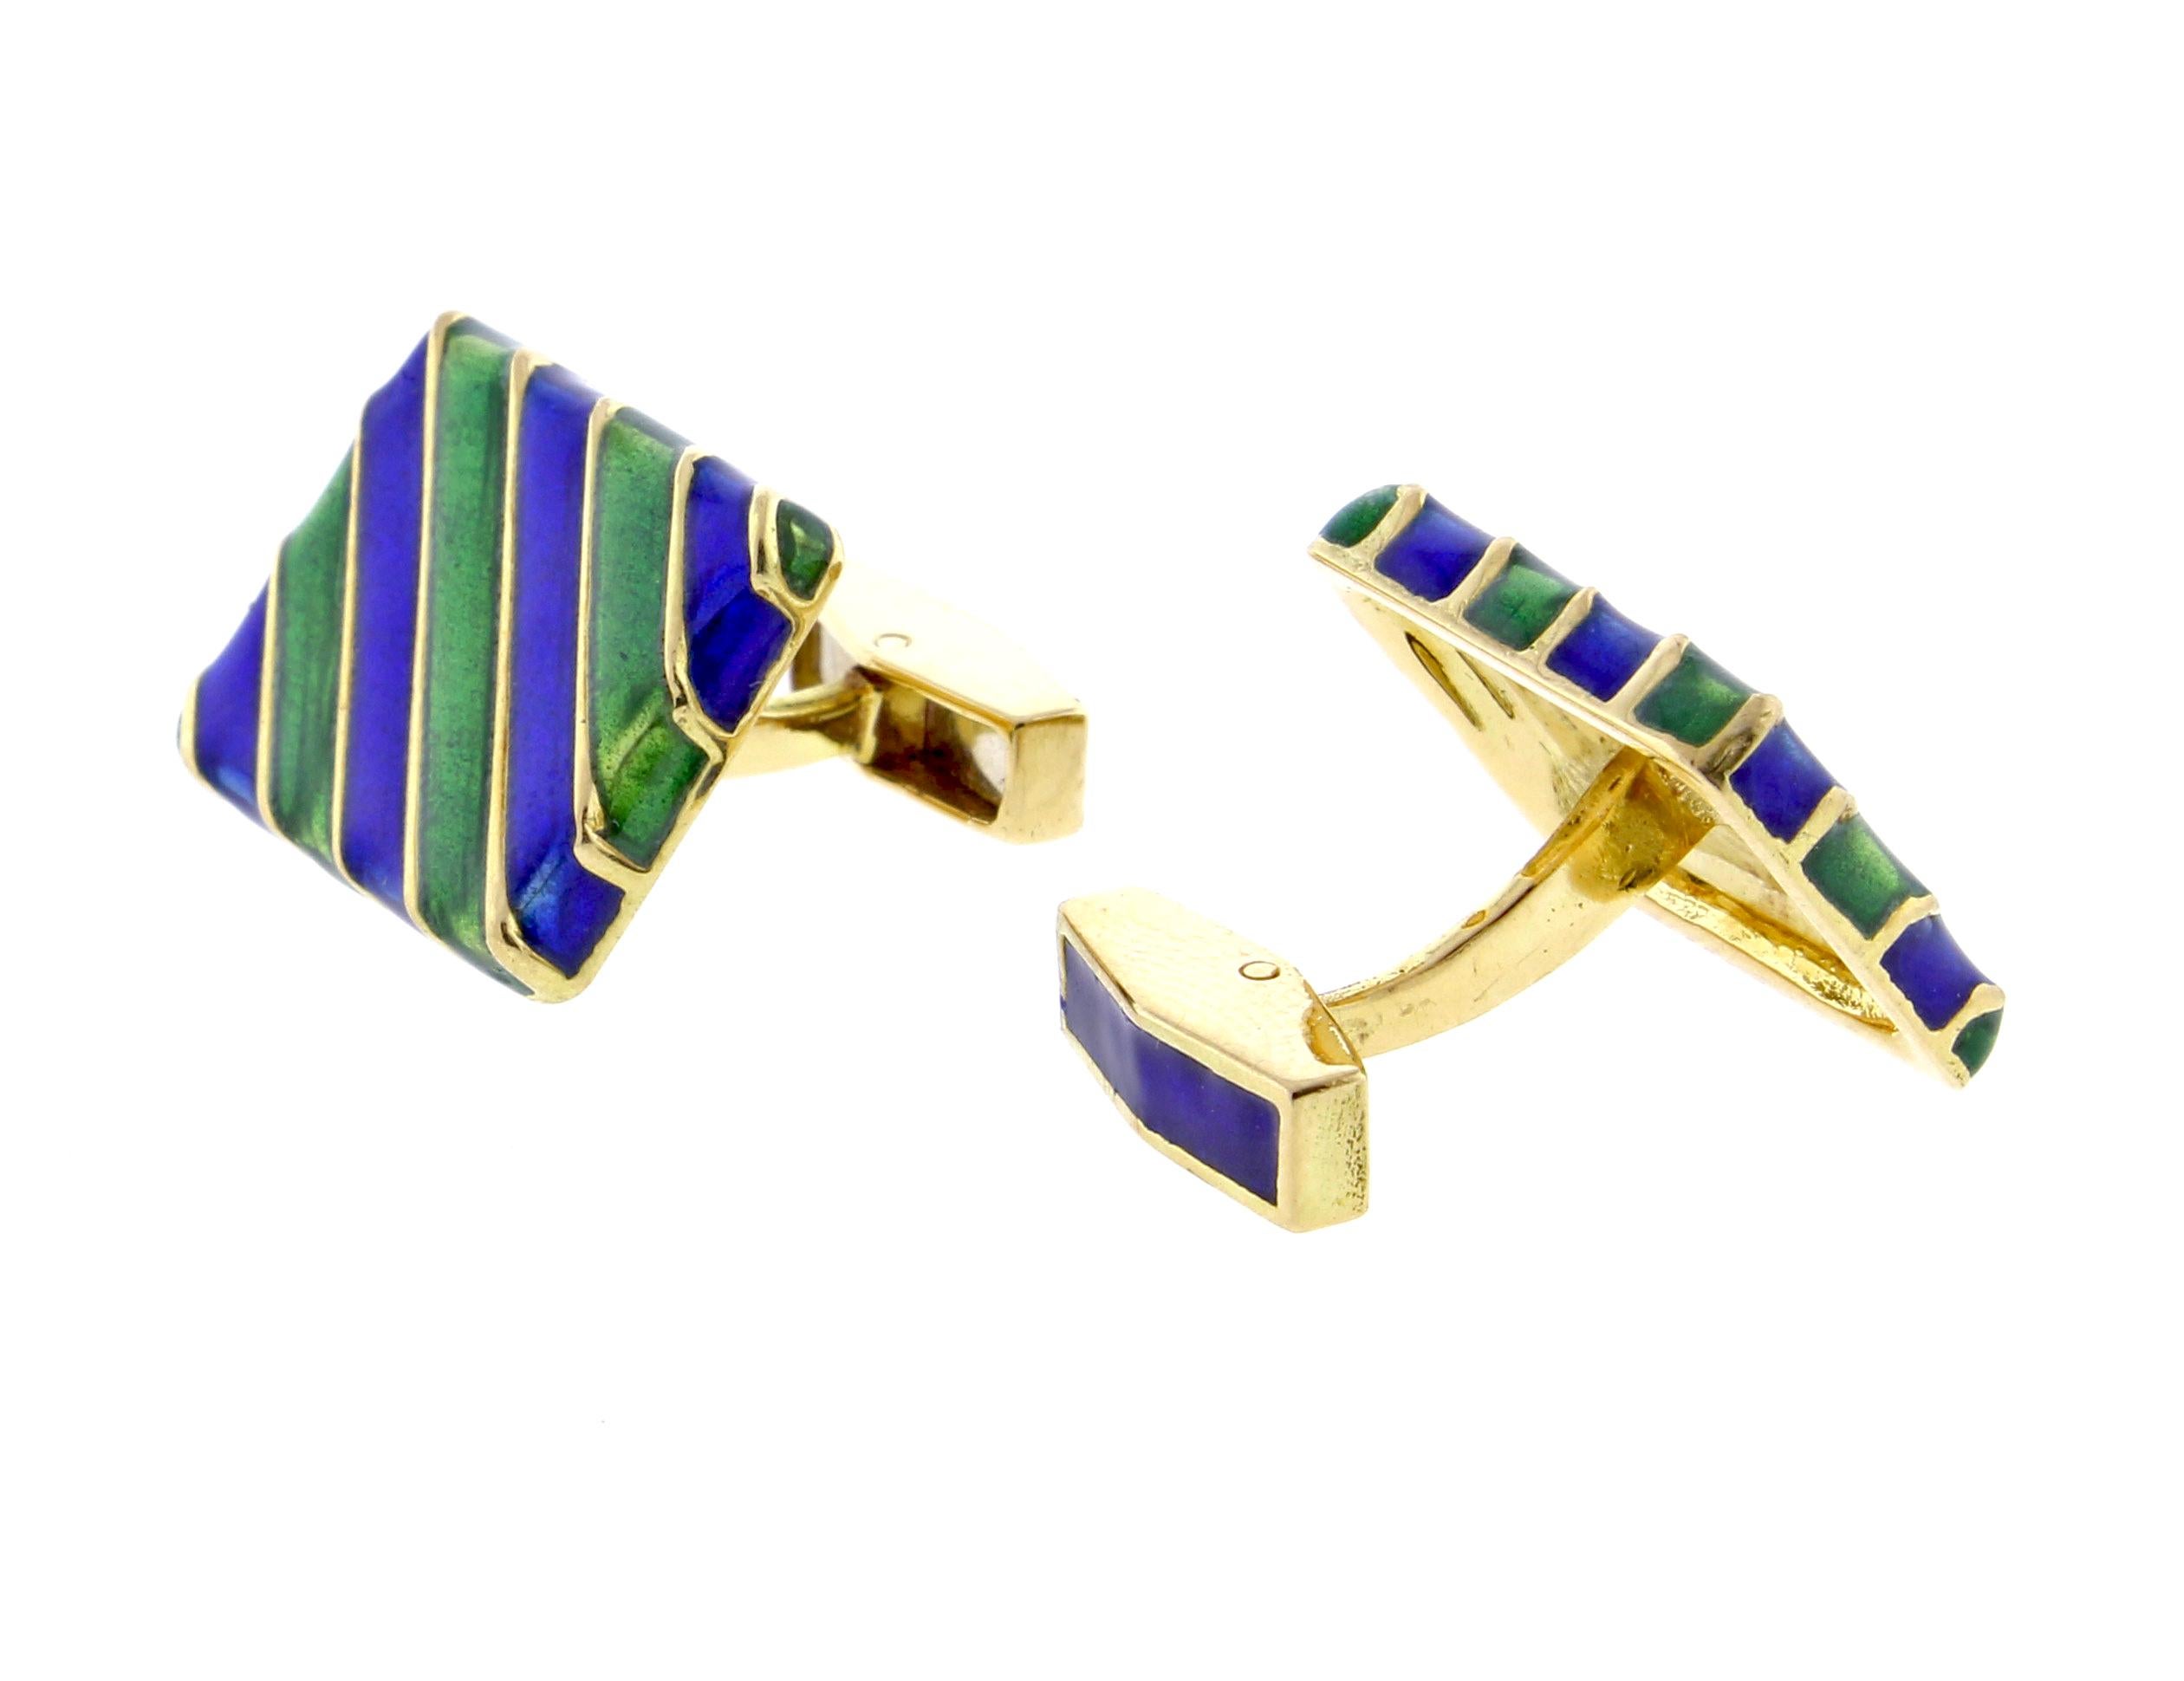 The rectangular cufflinks measure 3/4 by 5/8 of and inch.  The links feature alternating stripes of blue and green 
Cloisonne enamel.  19 grams